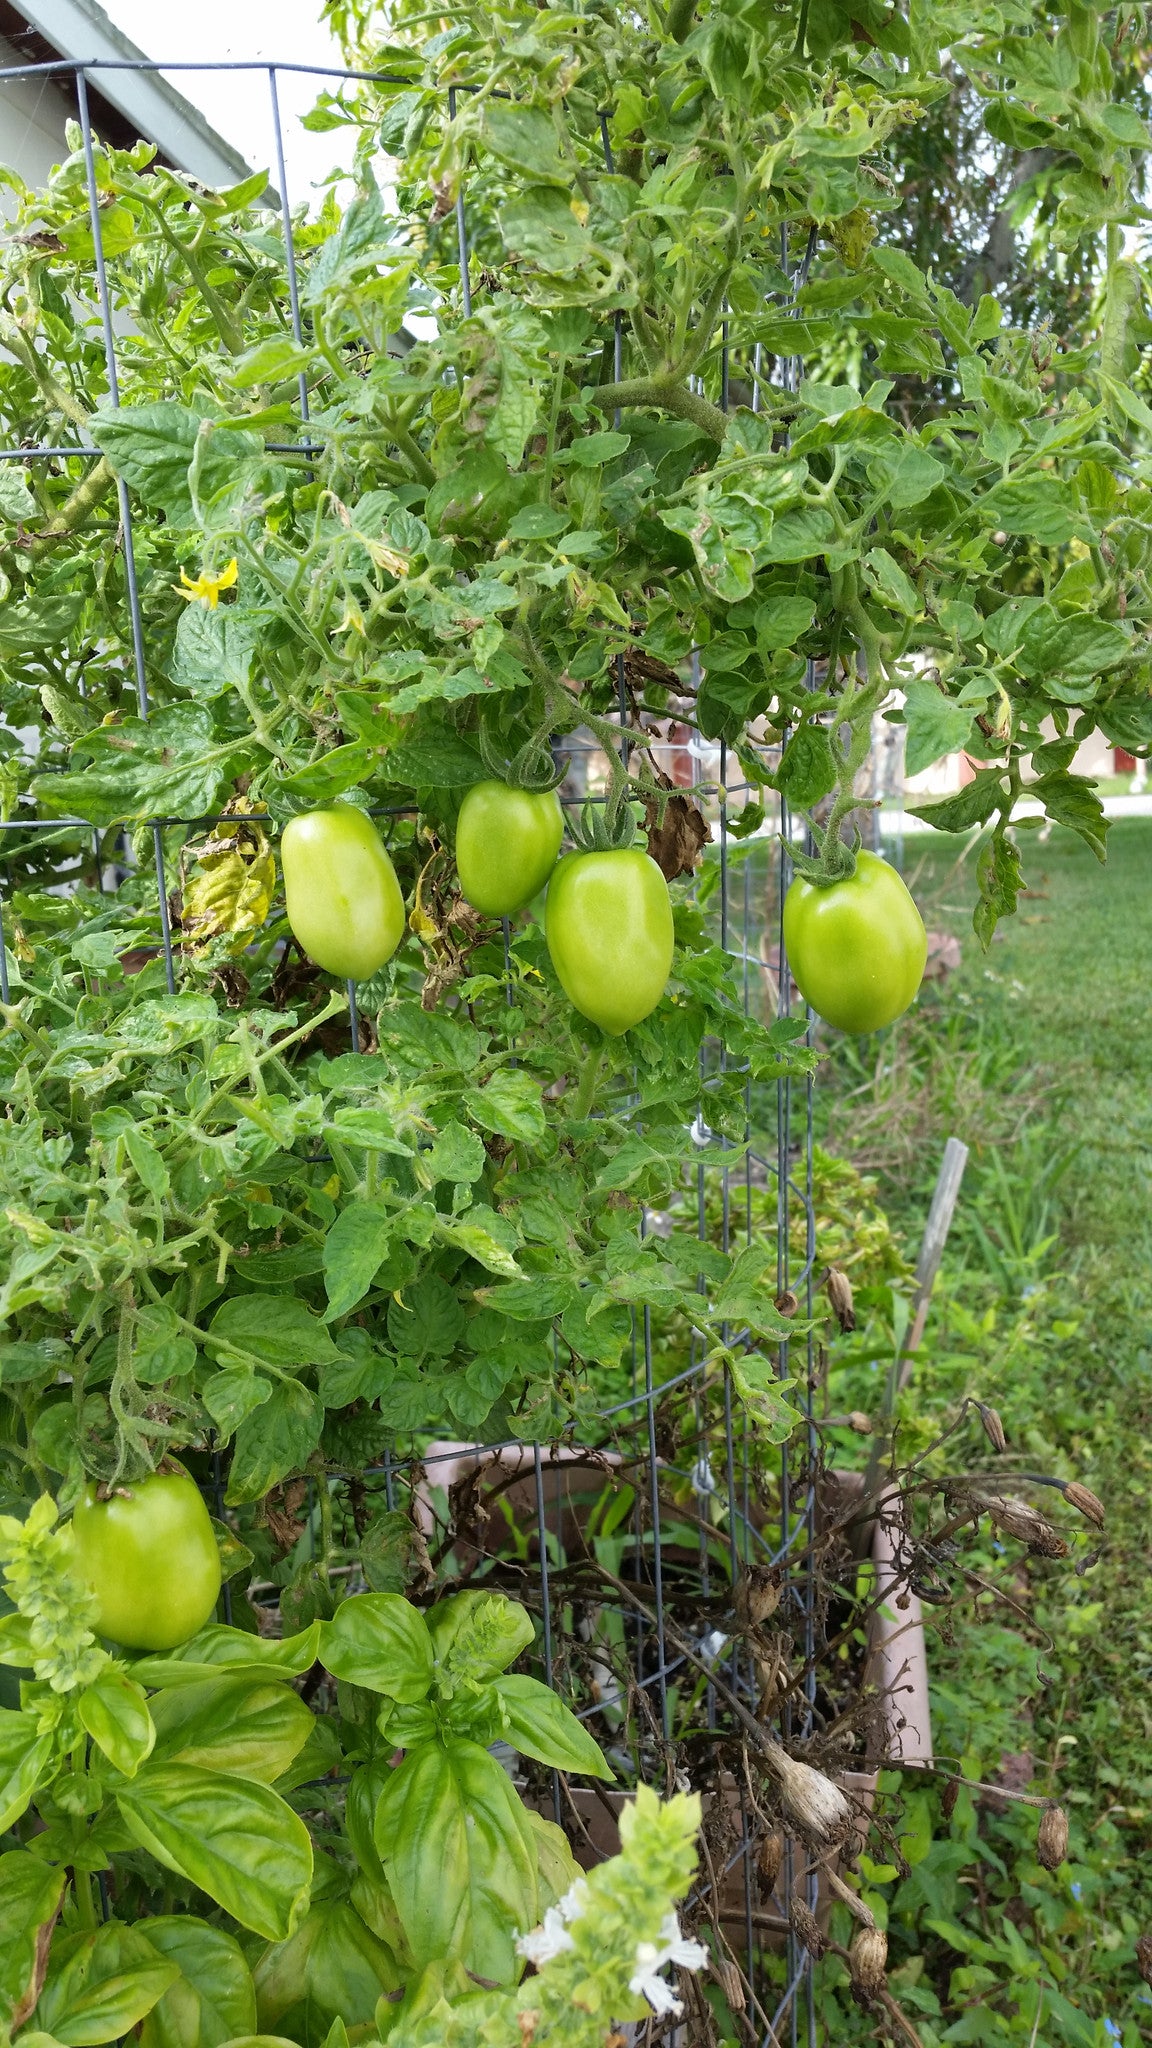 EASY DIY TOMATO CAGES